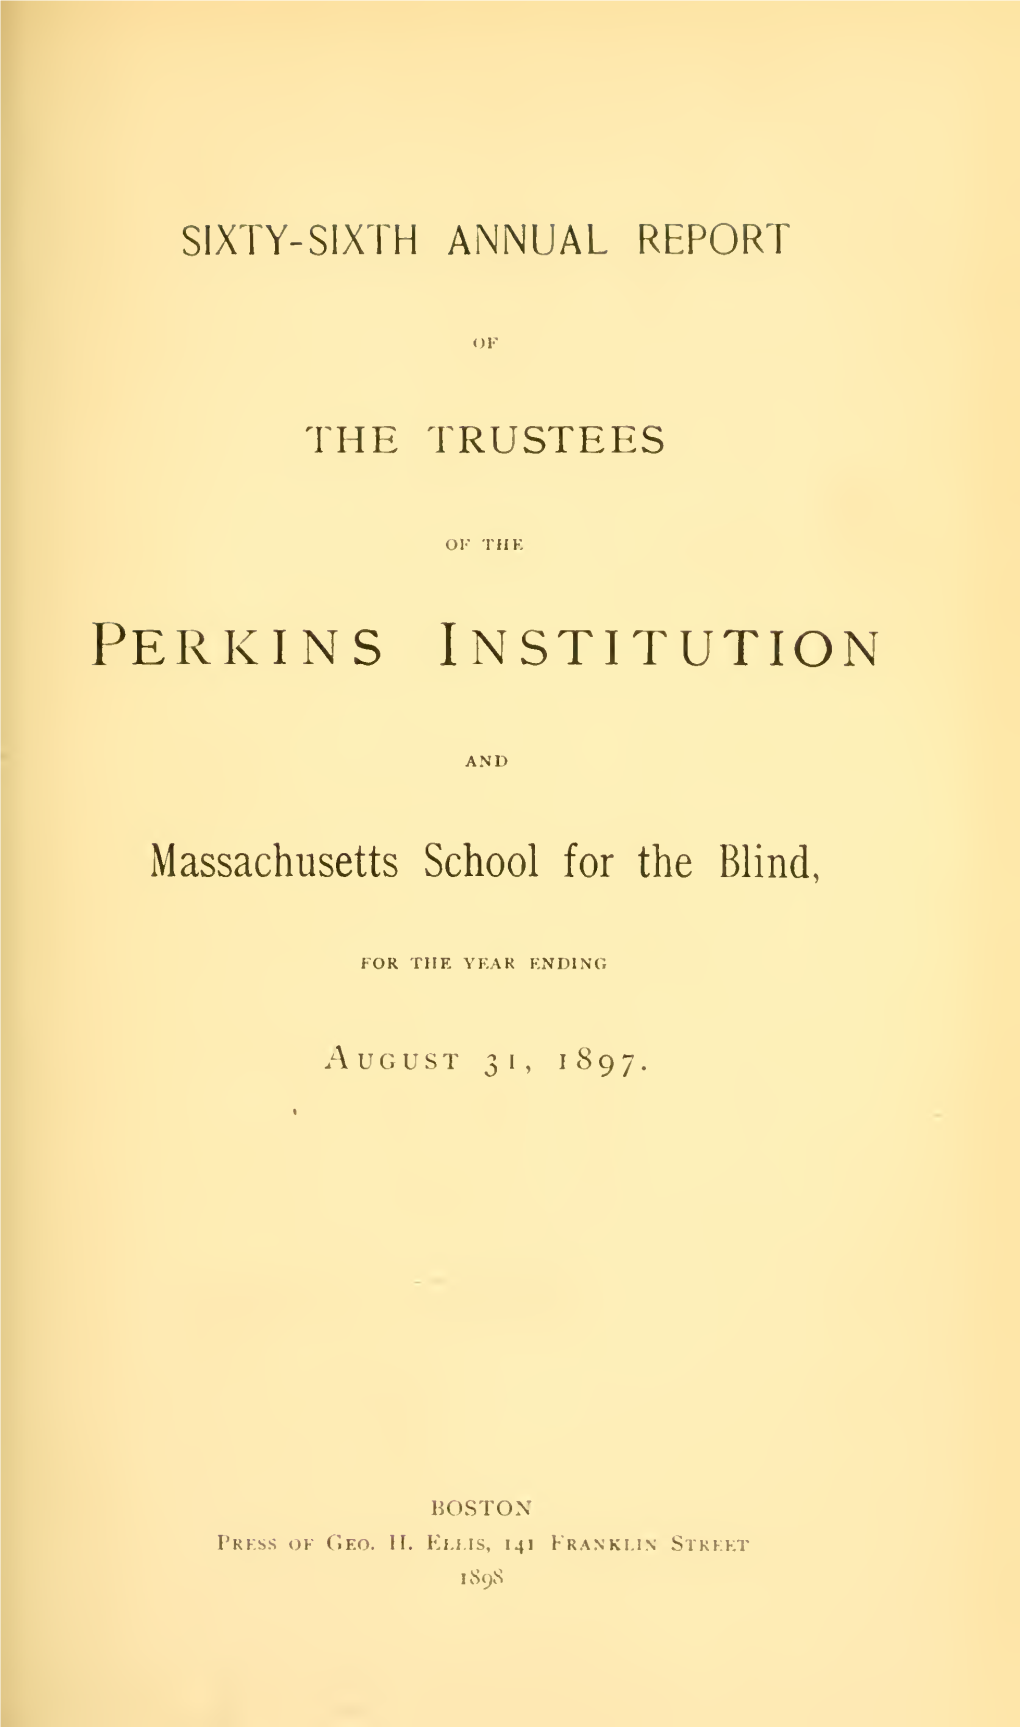 Annual Report of the Trustees of the Perkins Institution And